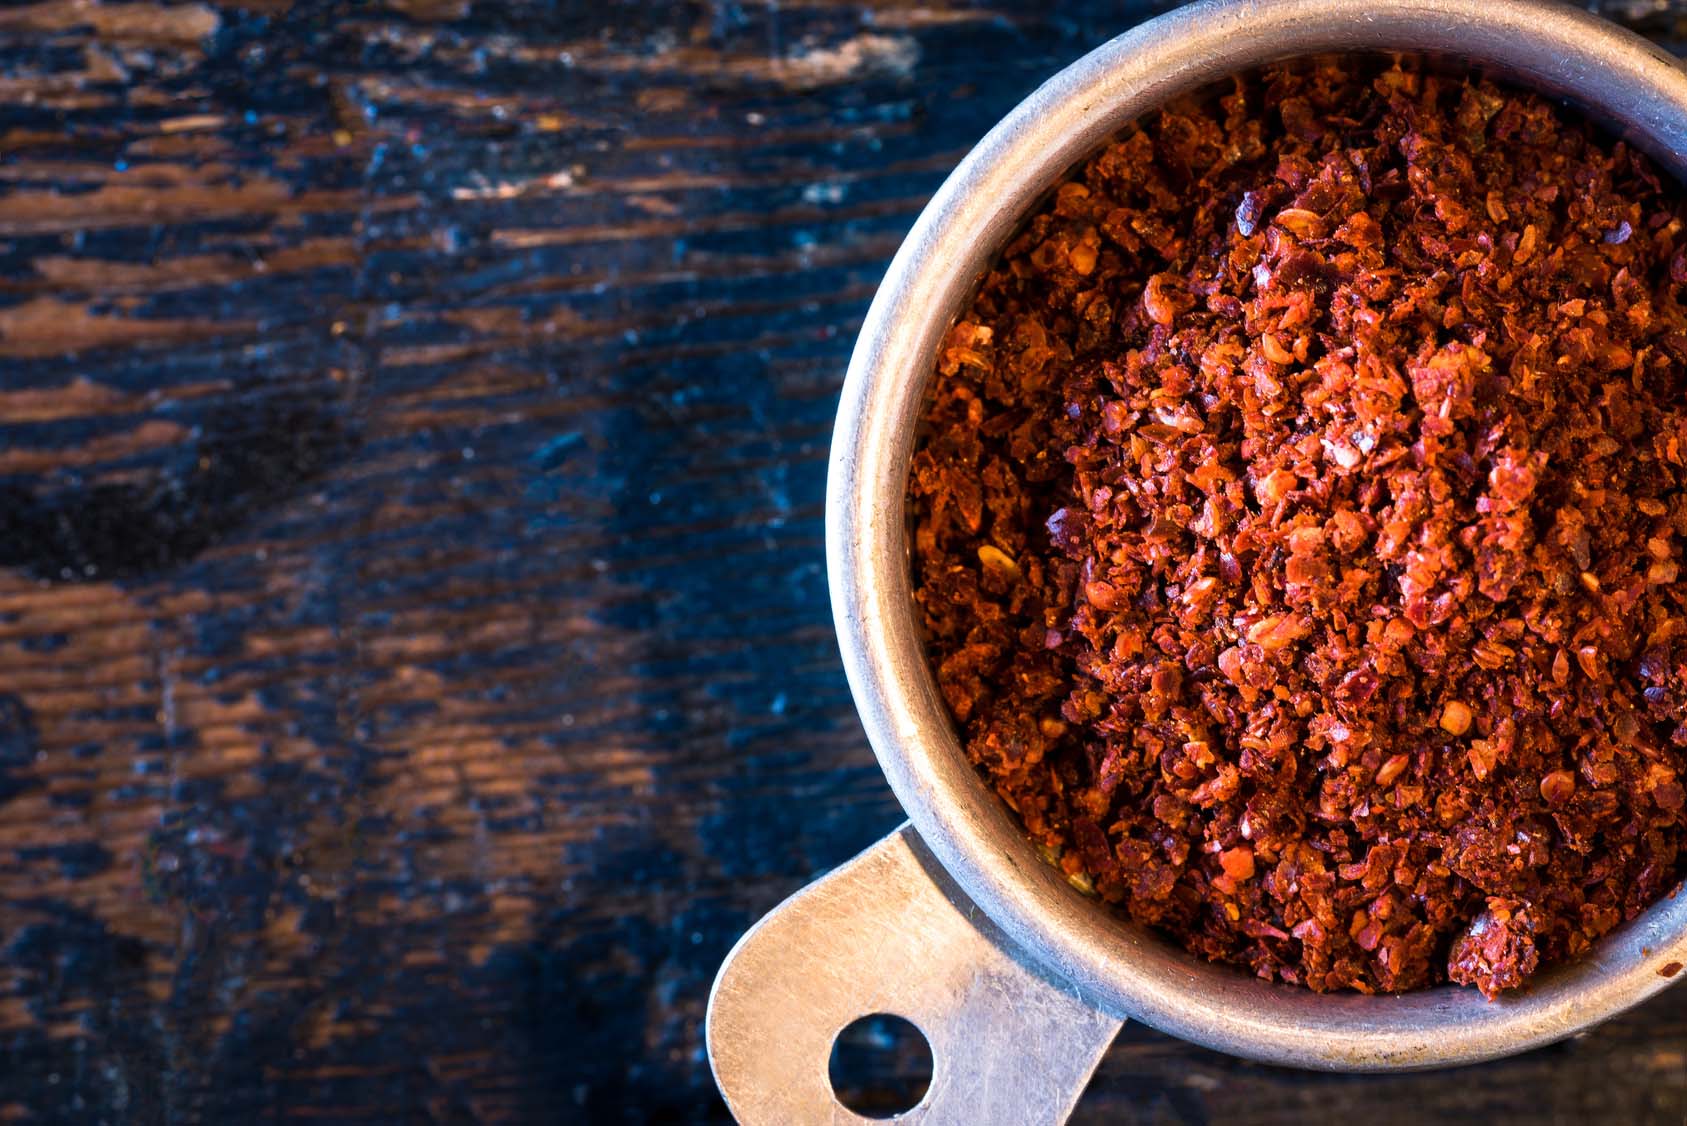 Bright red ground chili pepper in tin cup on wooden countertop. Gourmet Spice Company, Wholesale Food Distributor.